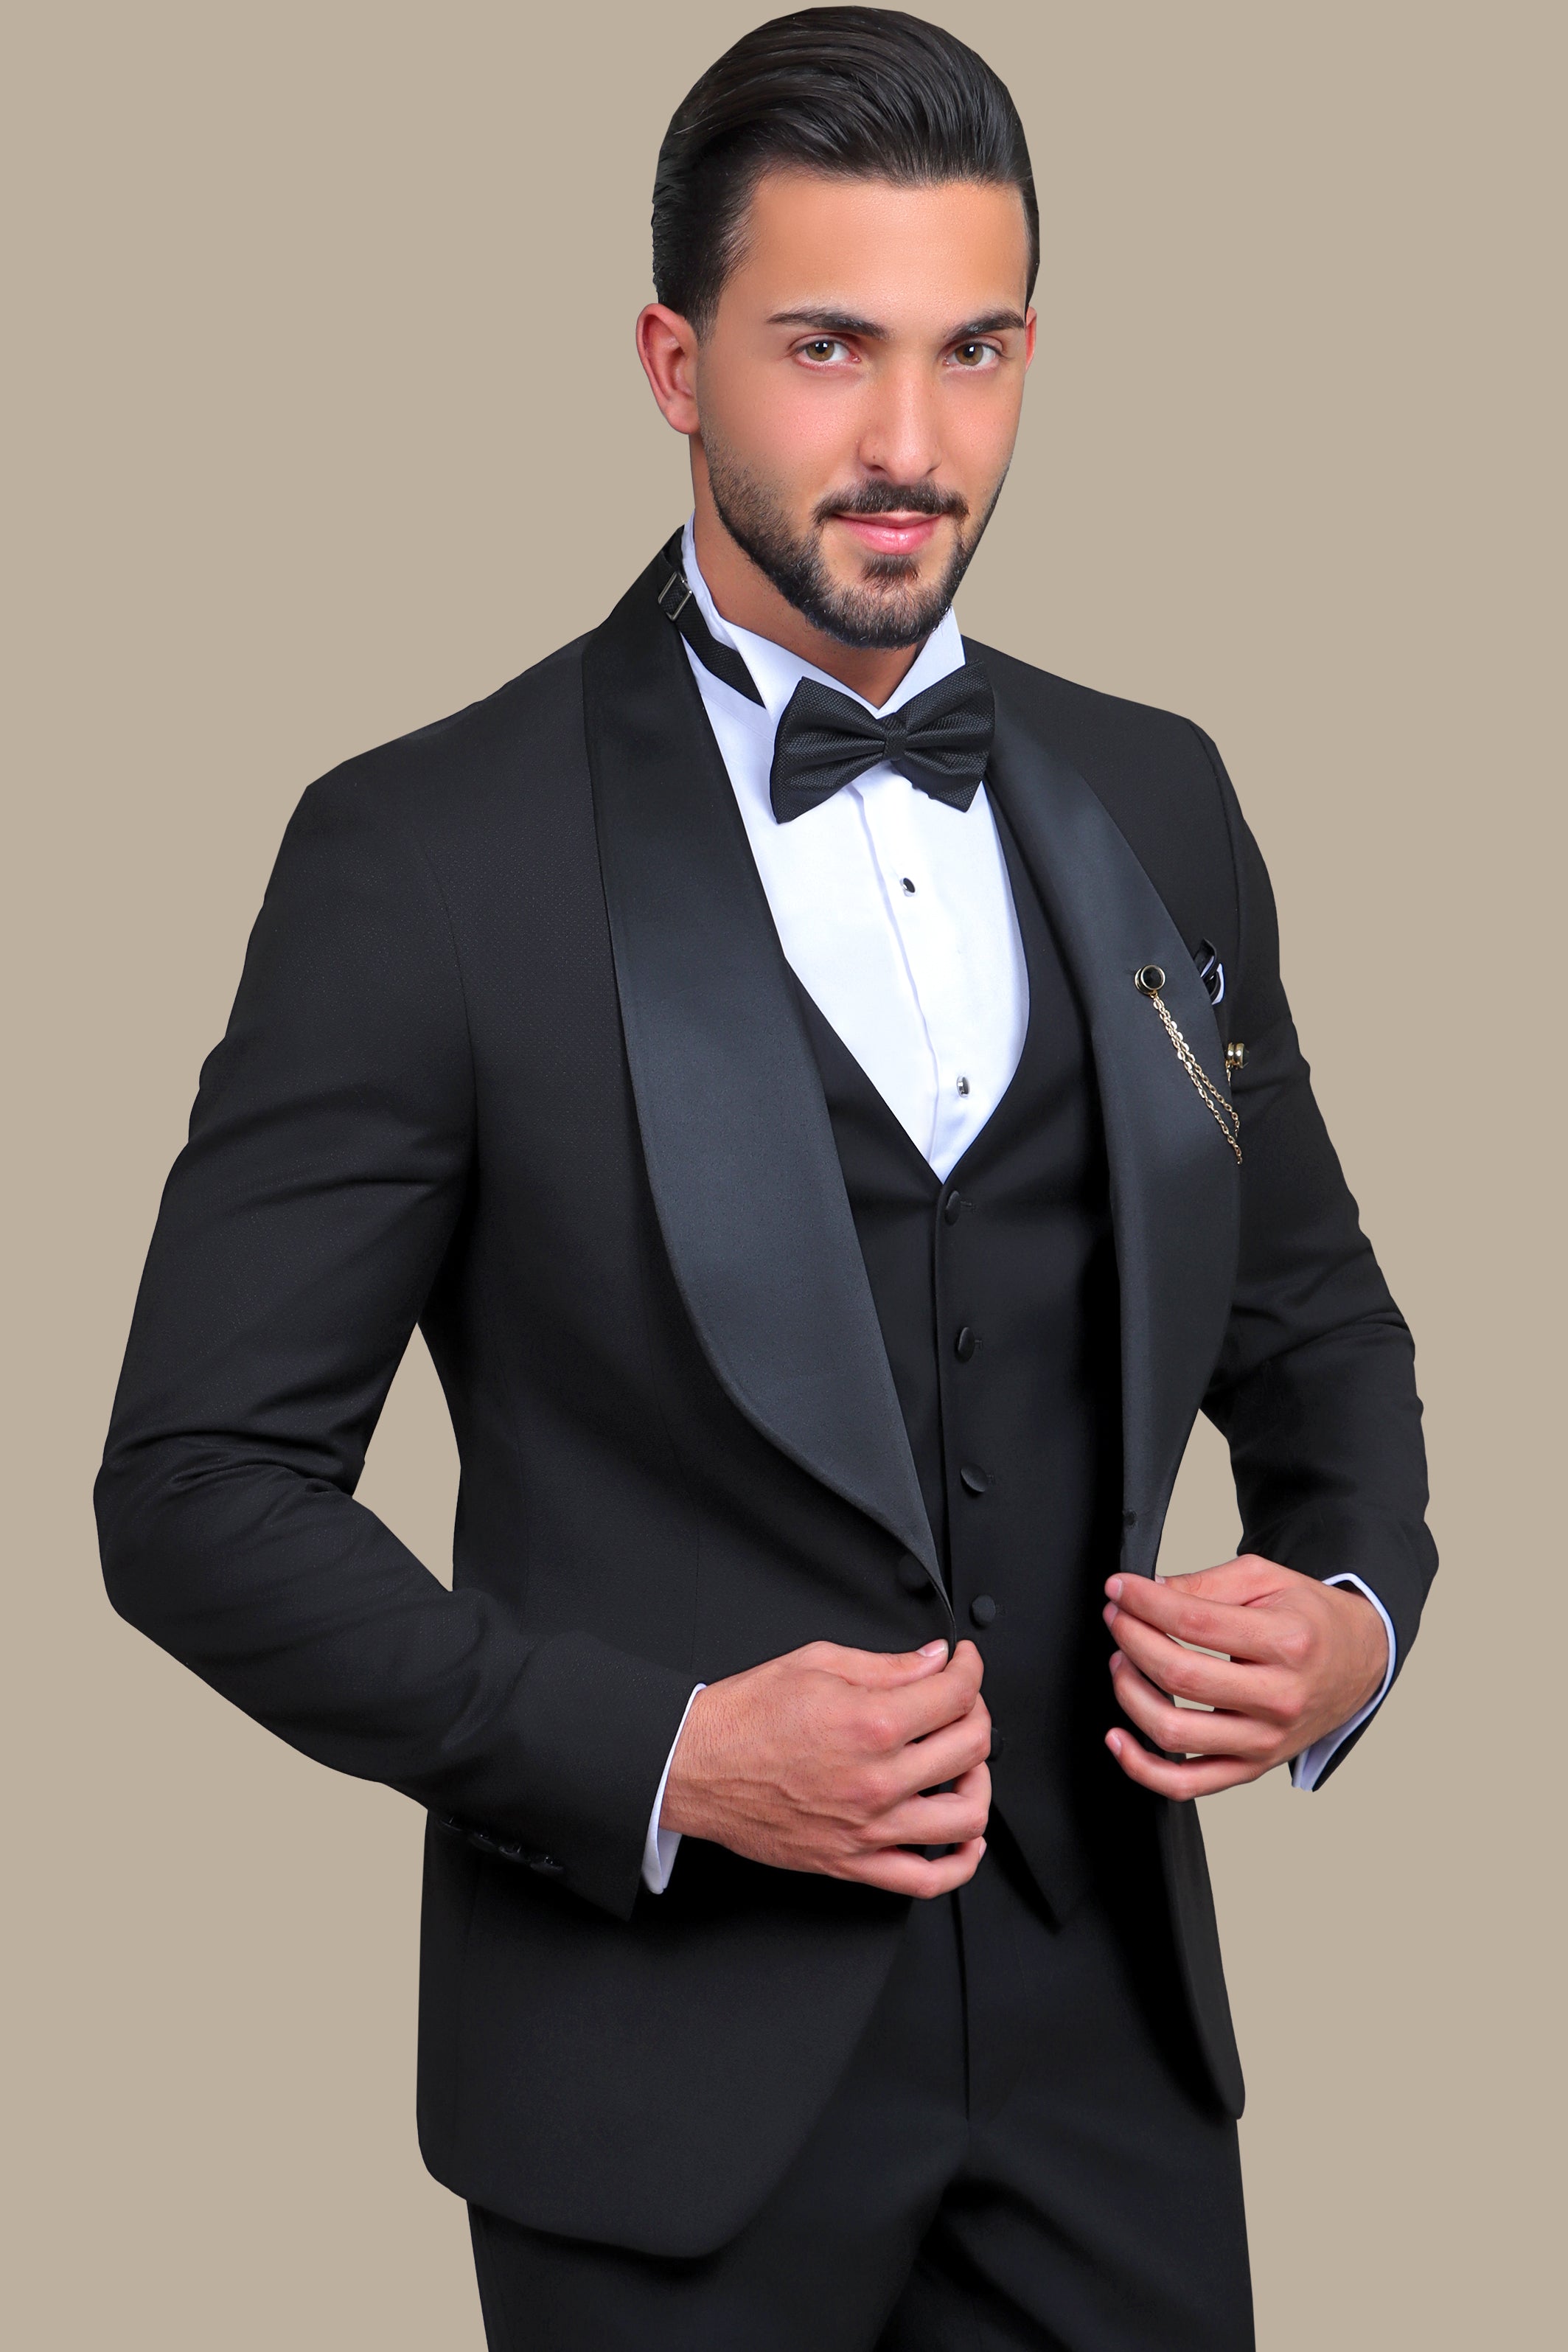 Sophisticated Elegance: Black Wide Shawl Collar Tuxedo for Timeless Style